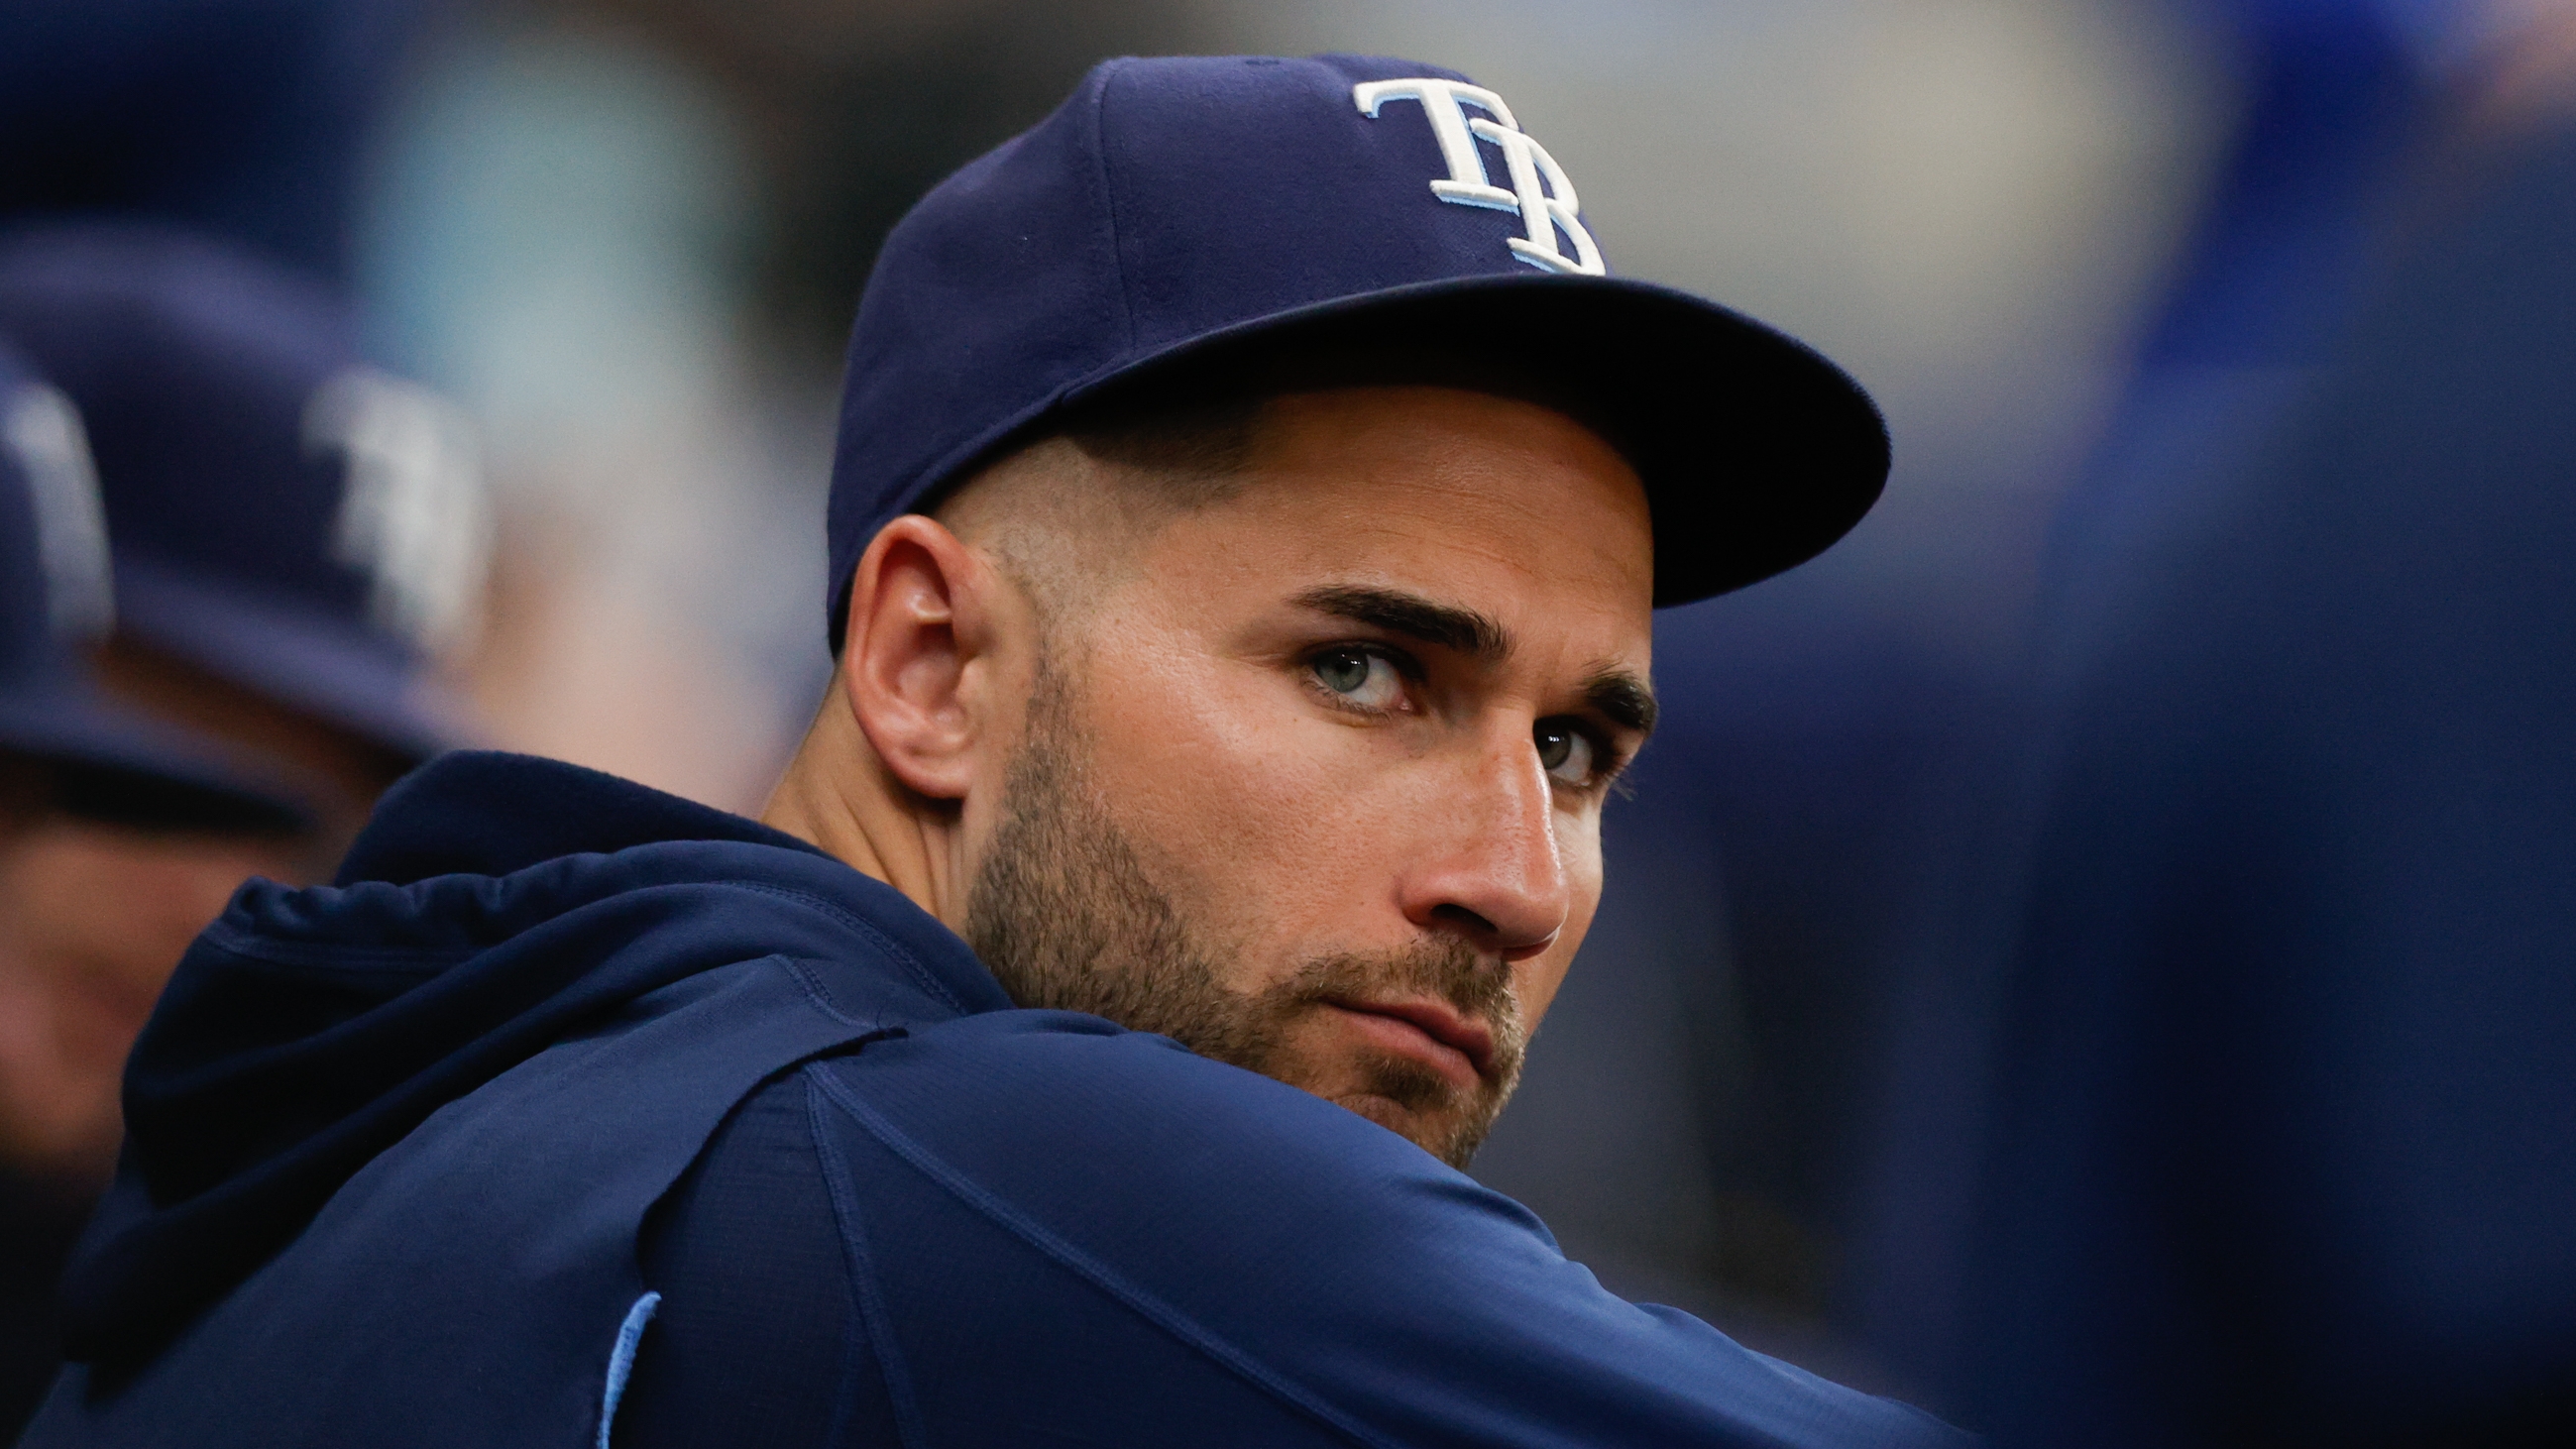 Tampa Bay Rays' Kevin Kiermaier's 10 best offensive plays of 2019